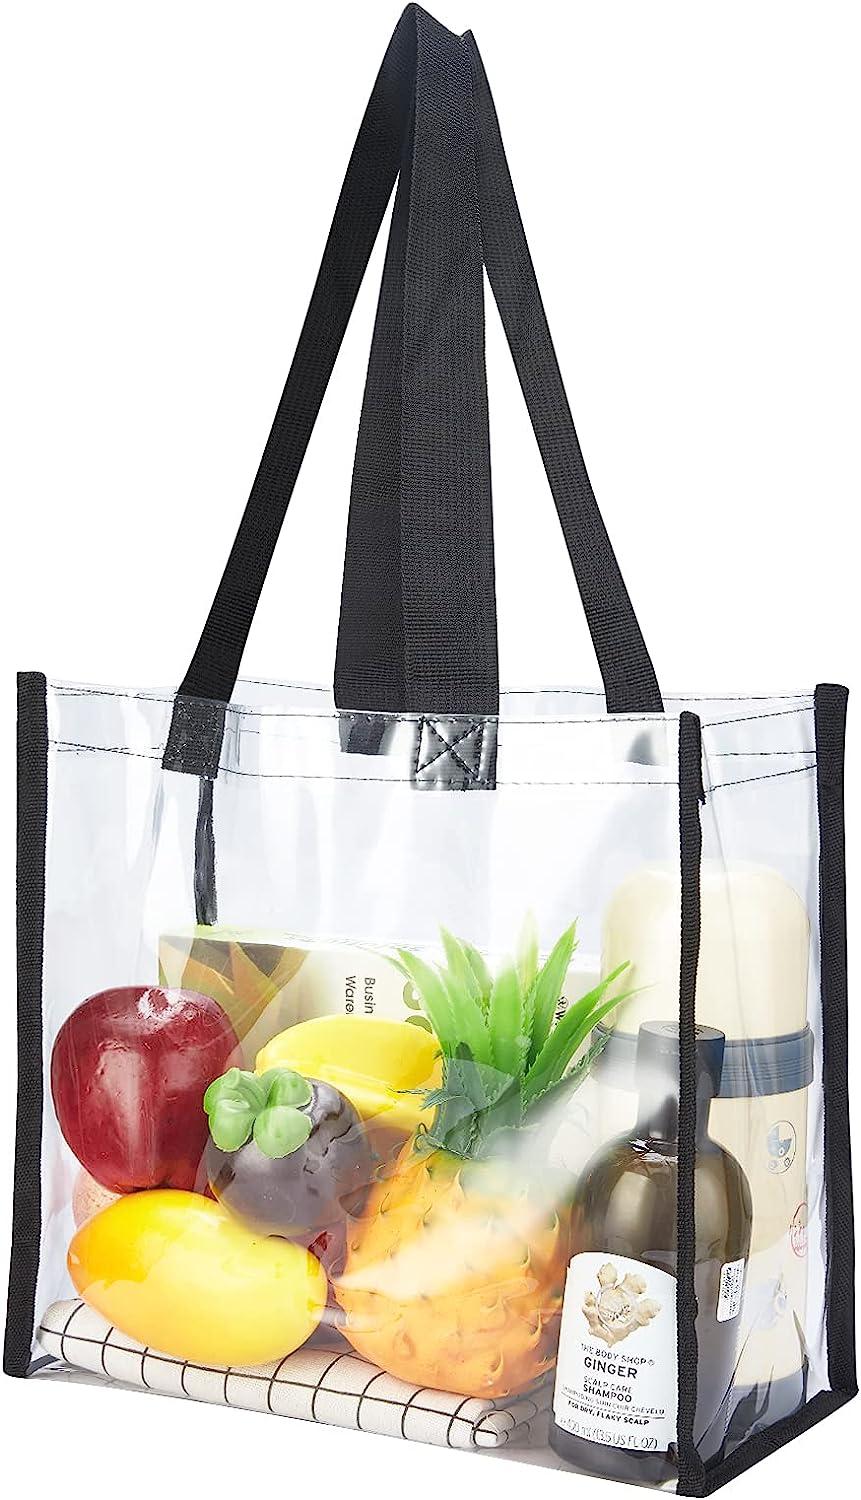  Clear Bag Stadium Approved,Security Approved Clear Tote Bag-12X12X6  : Sports & Outdoors